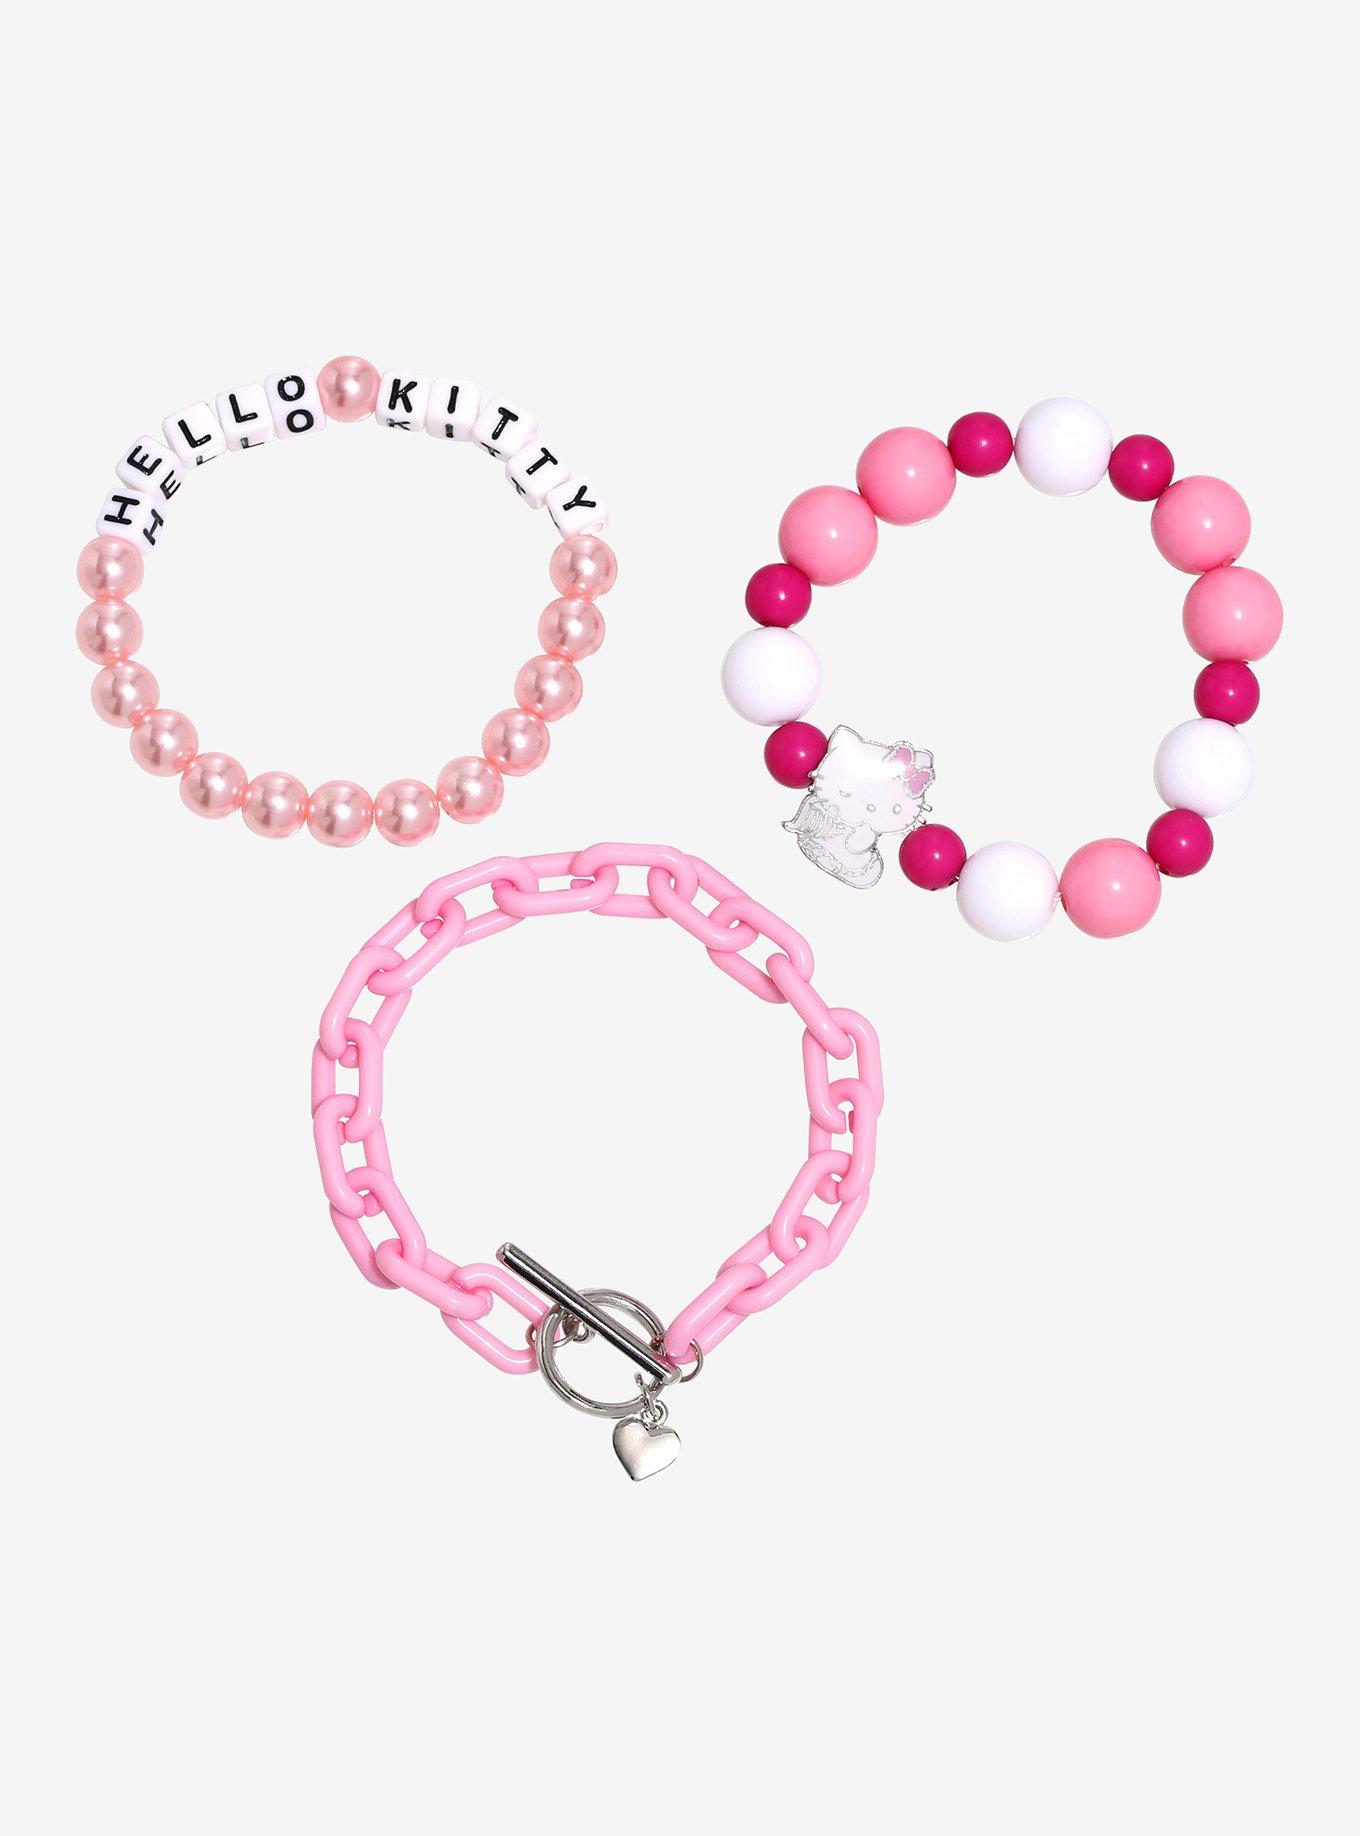 Linx Bracelet with Pink Hello Kitty Themed Charms